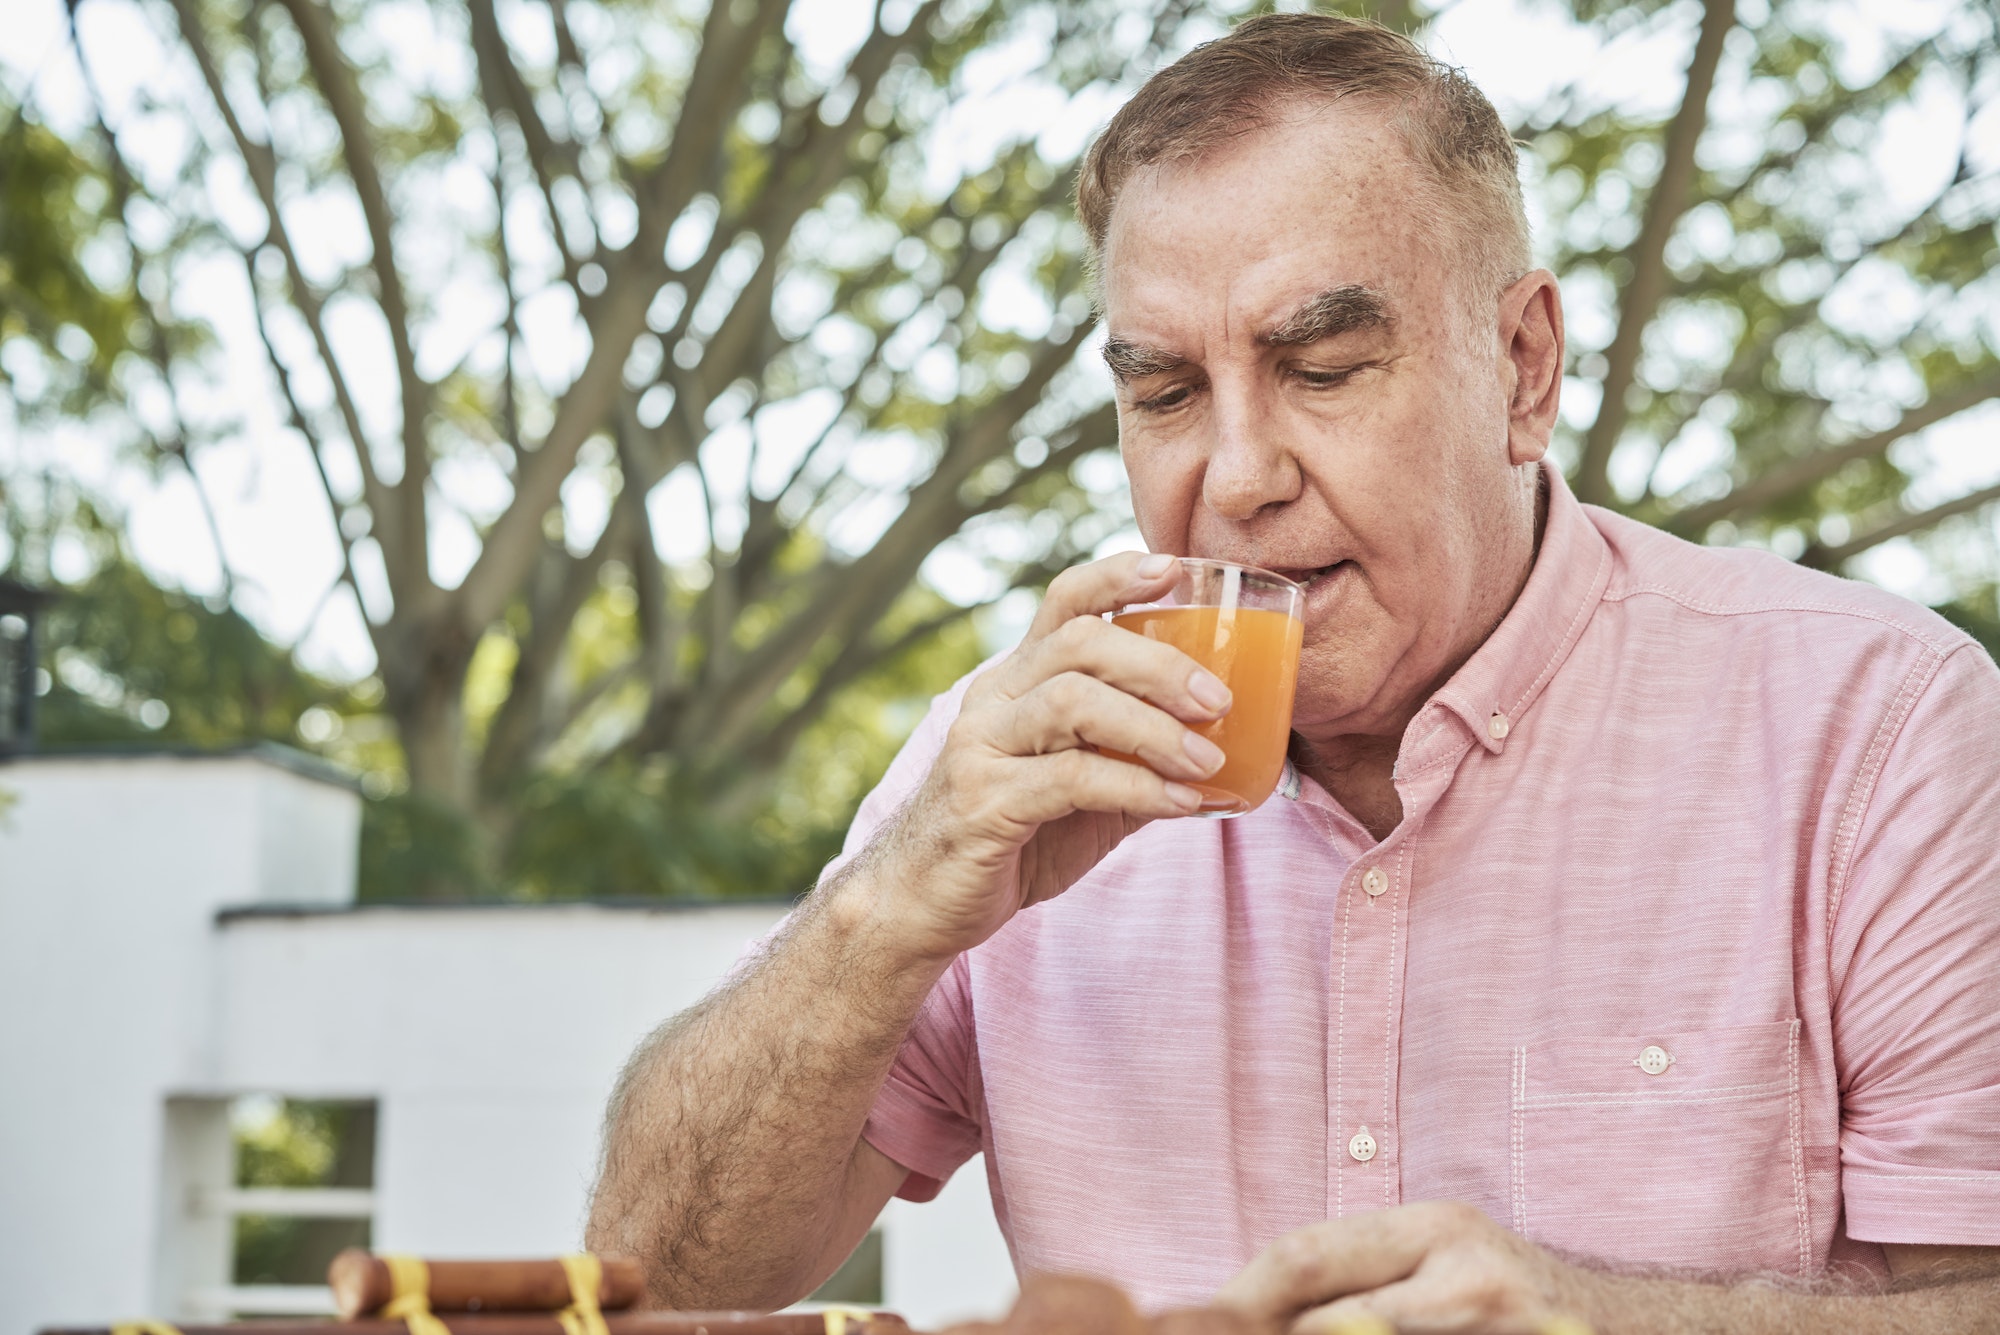 Do Seniors Need More Vitamin C As They Age? – Let’s Take A Look